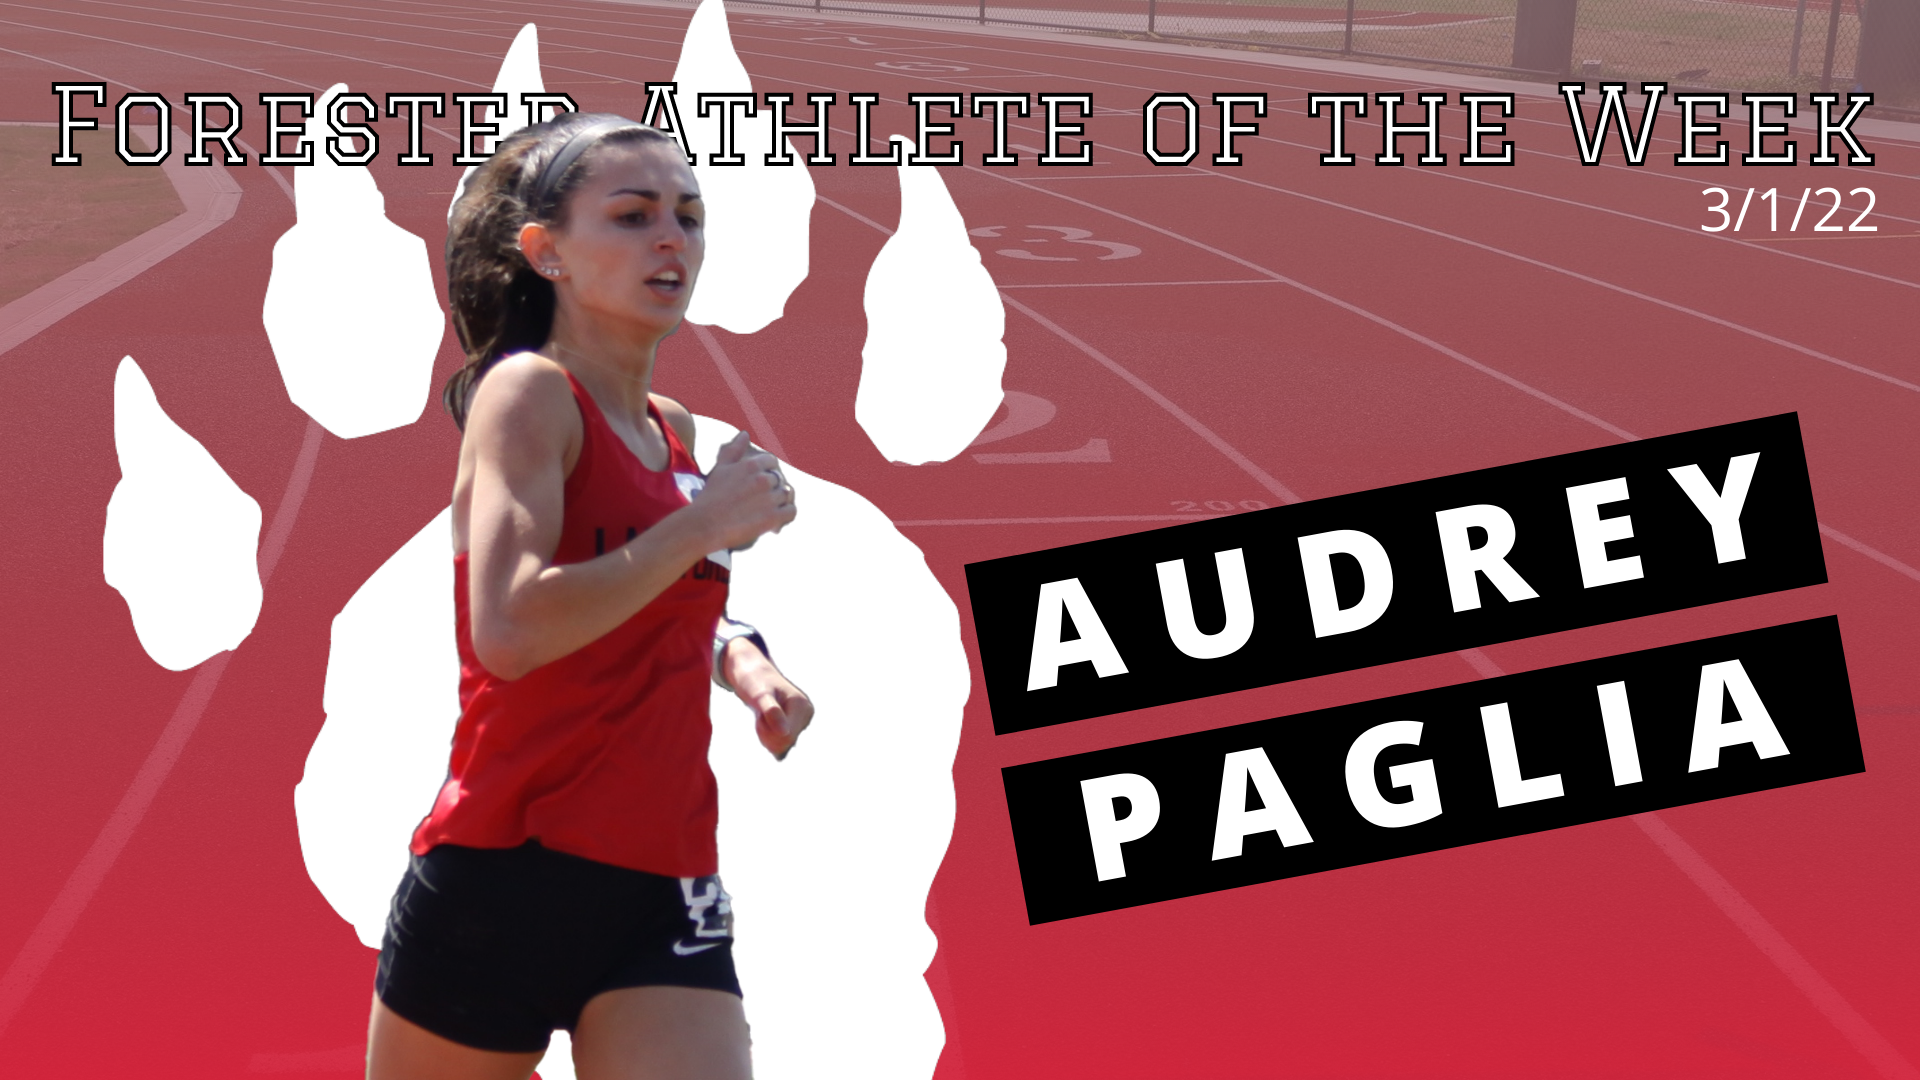 Paglia Earns Women's Forester Athlete of the Week Honors Again